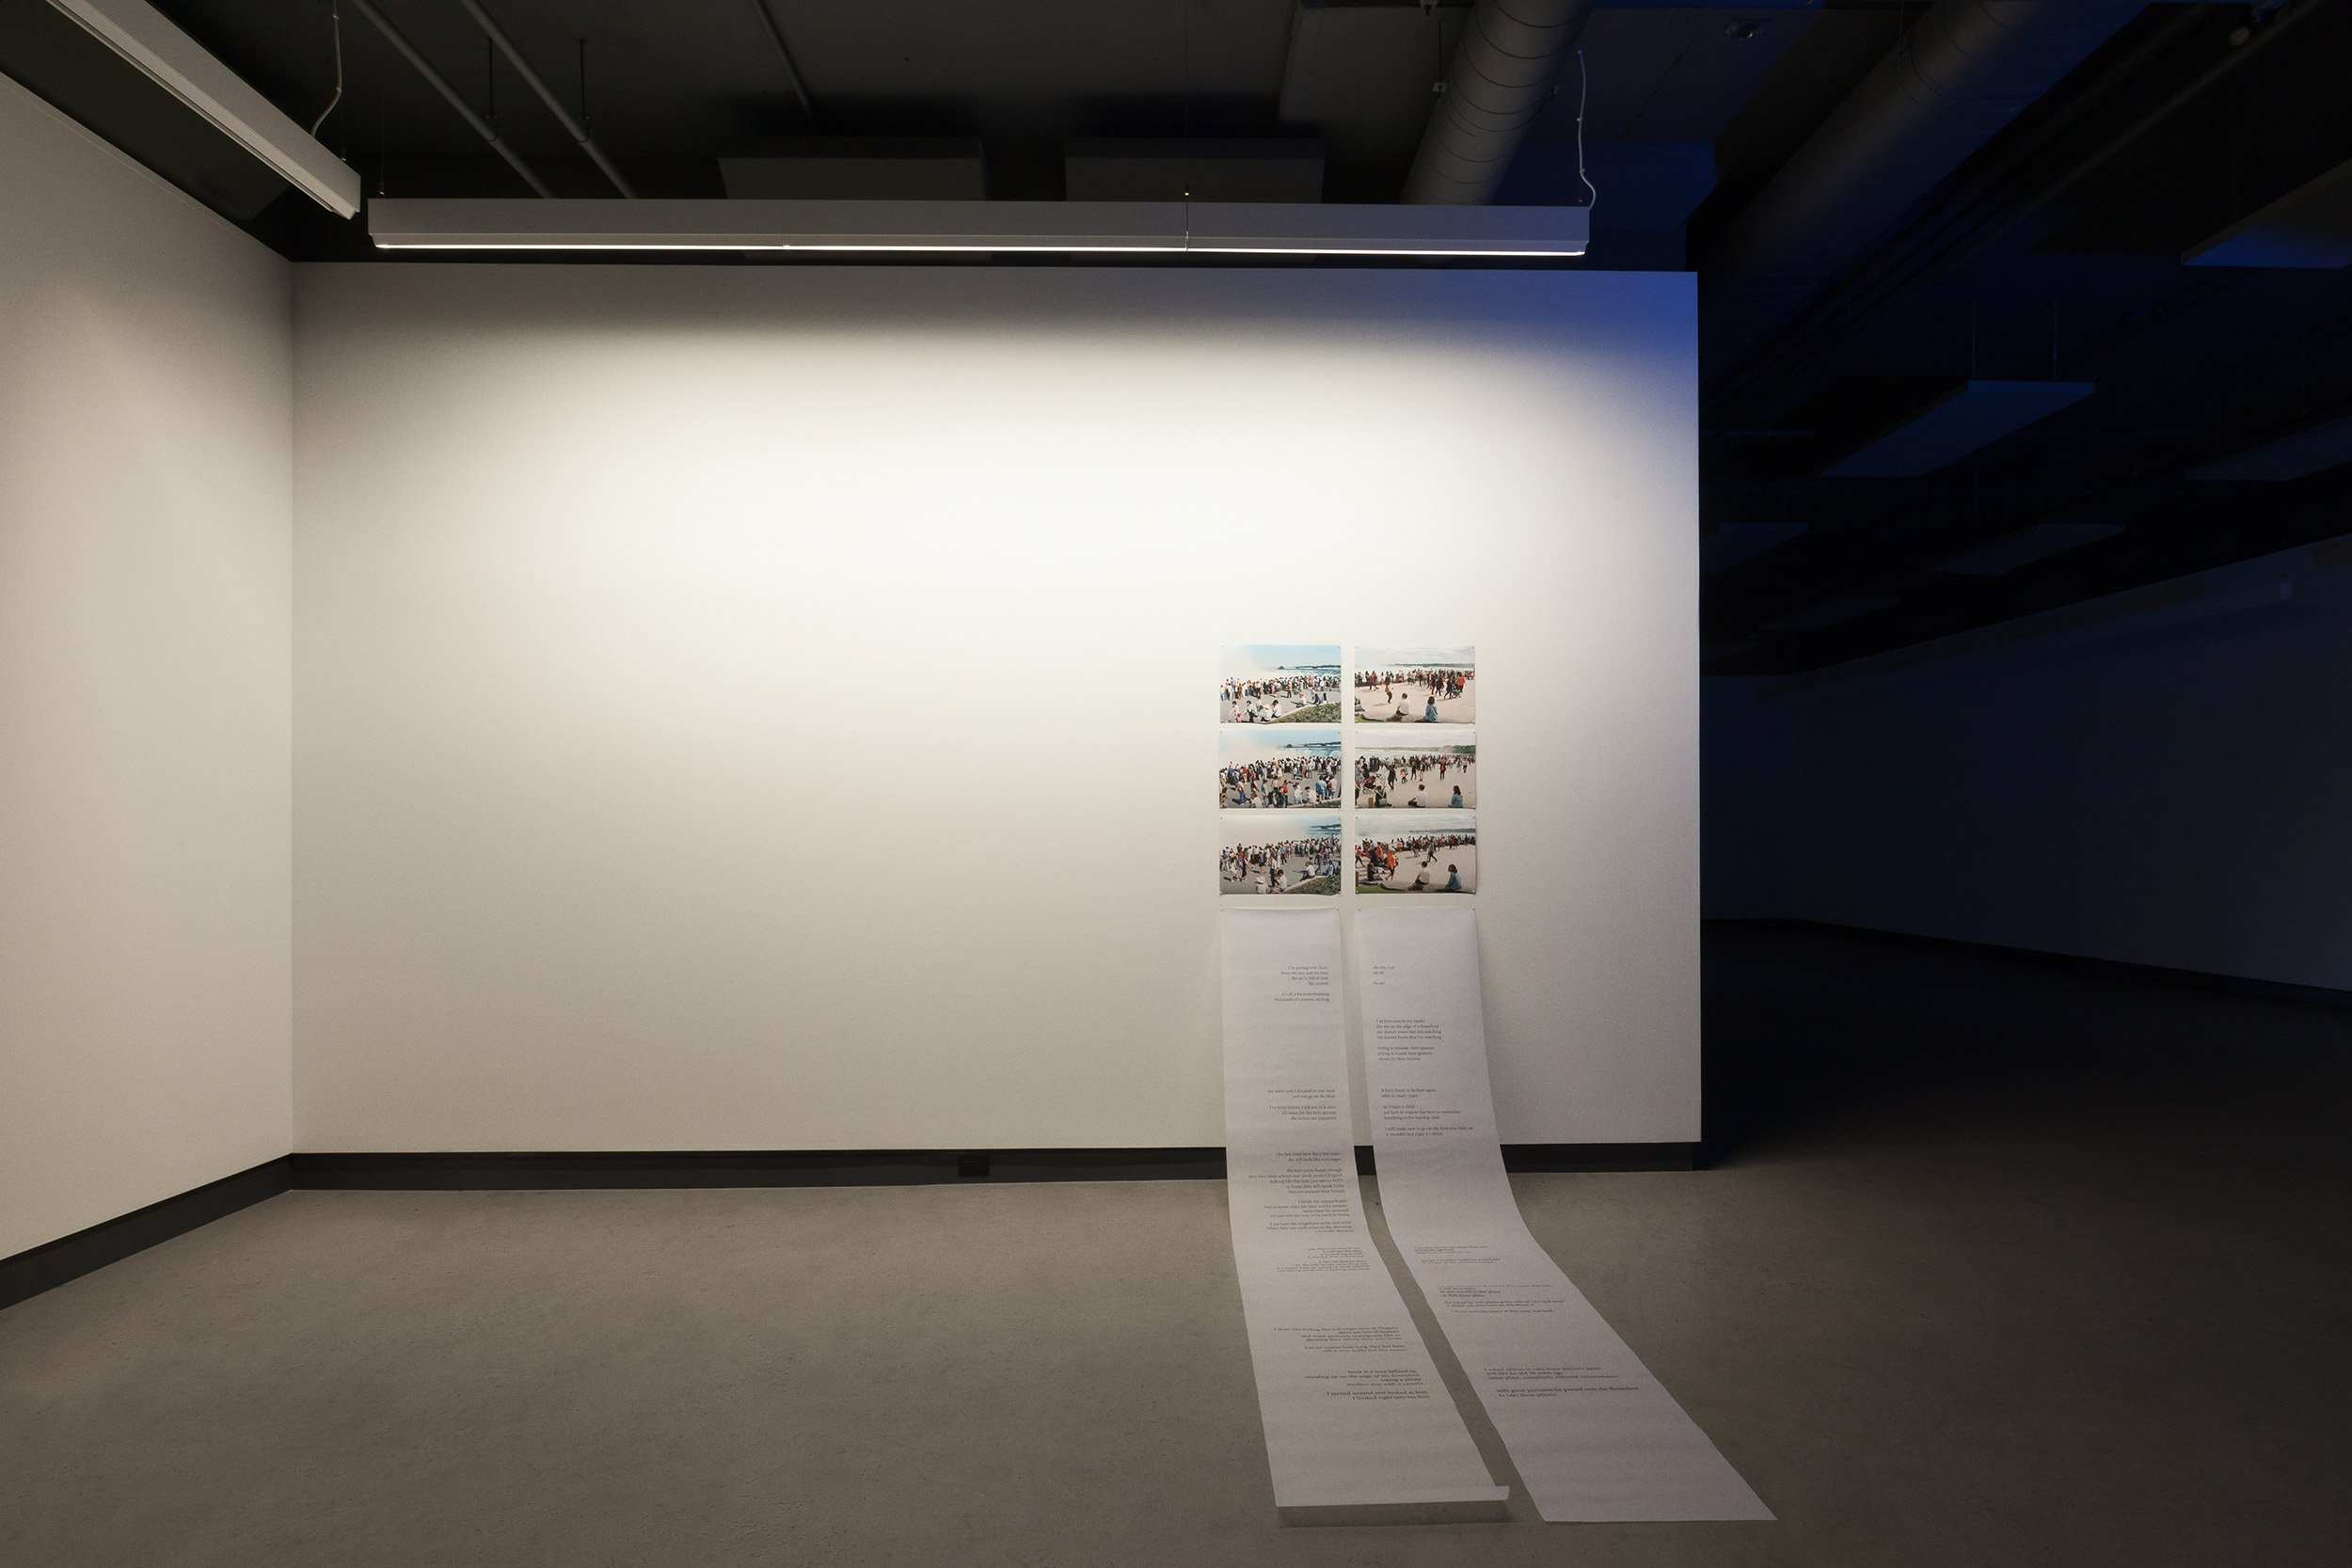  © Zinnia Naqvi,  I’m getting a bit dizzy from the sun and the heat (Another desi with a camera)  (2019) from the series  Yours to Discover  (2019). Installation view of the exhibition  the Translation is Approximate , Dazibao, 2021. Photo: Marilou C